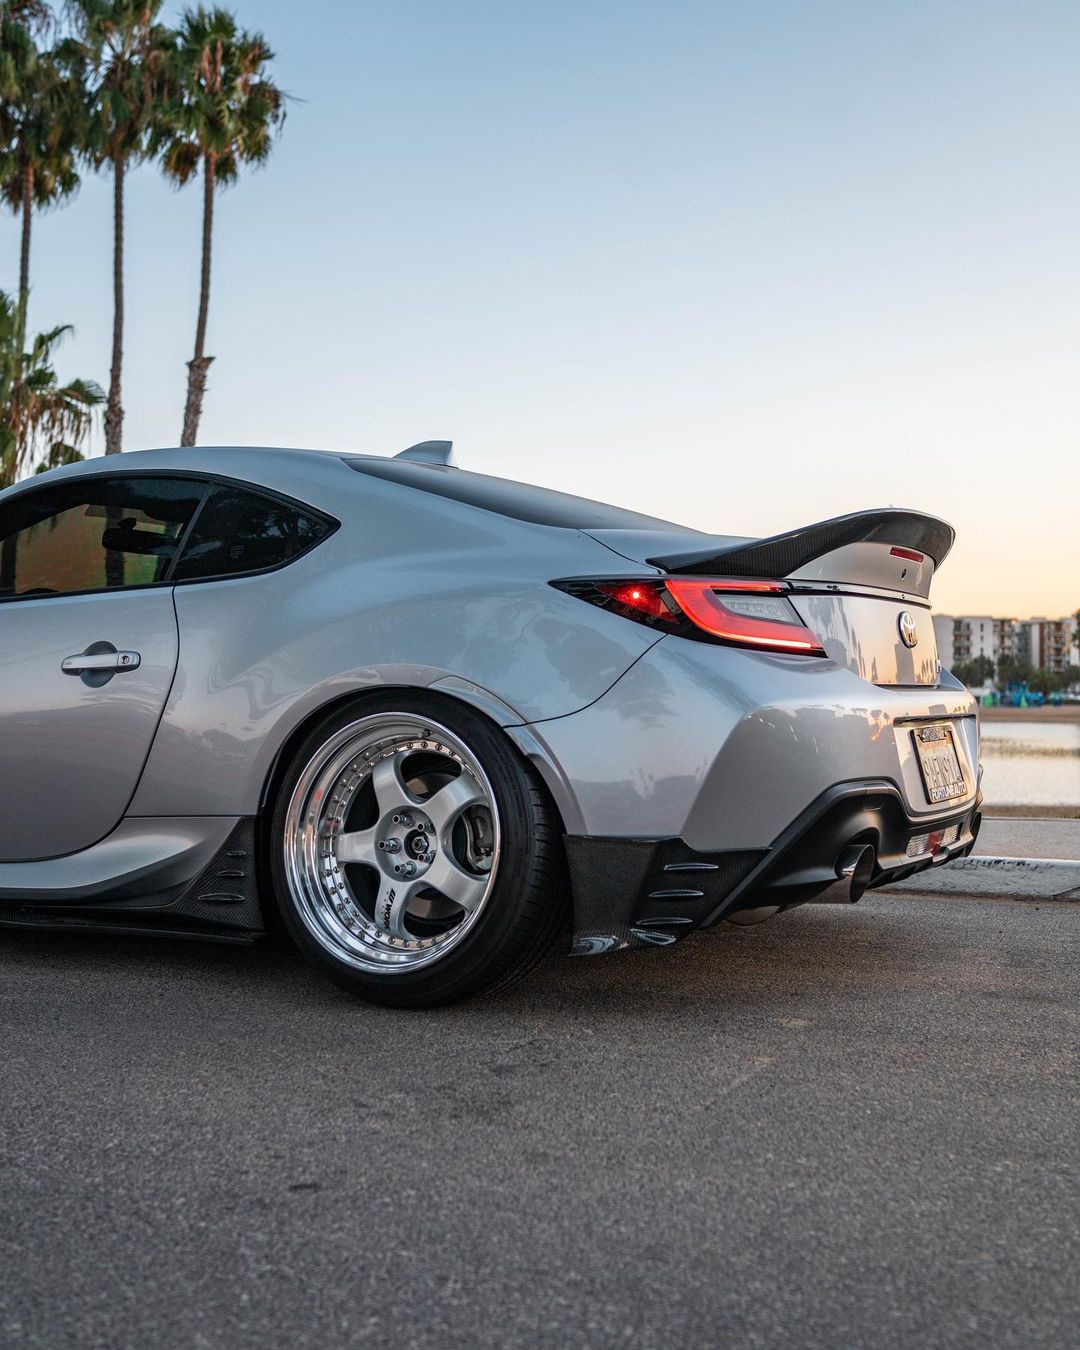 Check our price and buy Street hunter widebody kit for Toyota BRZ/GR86!